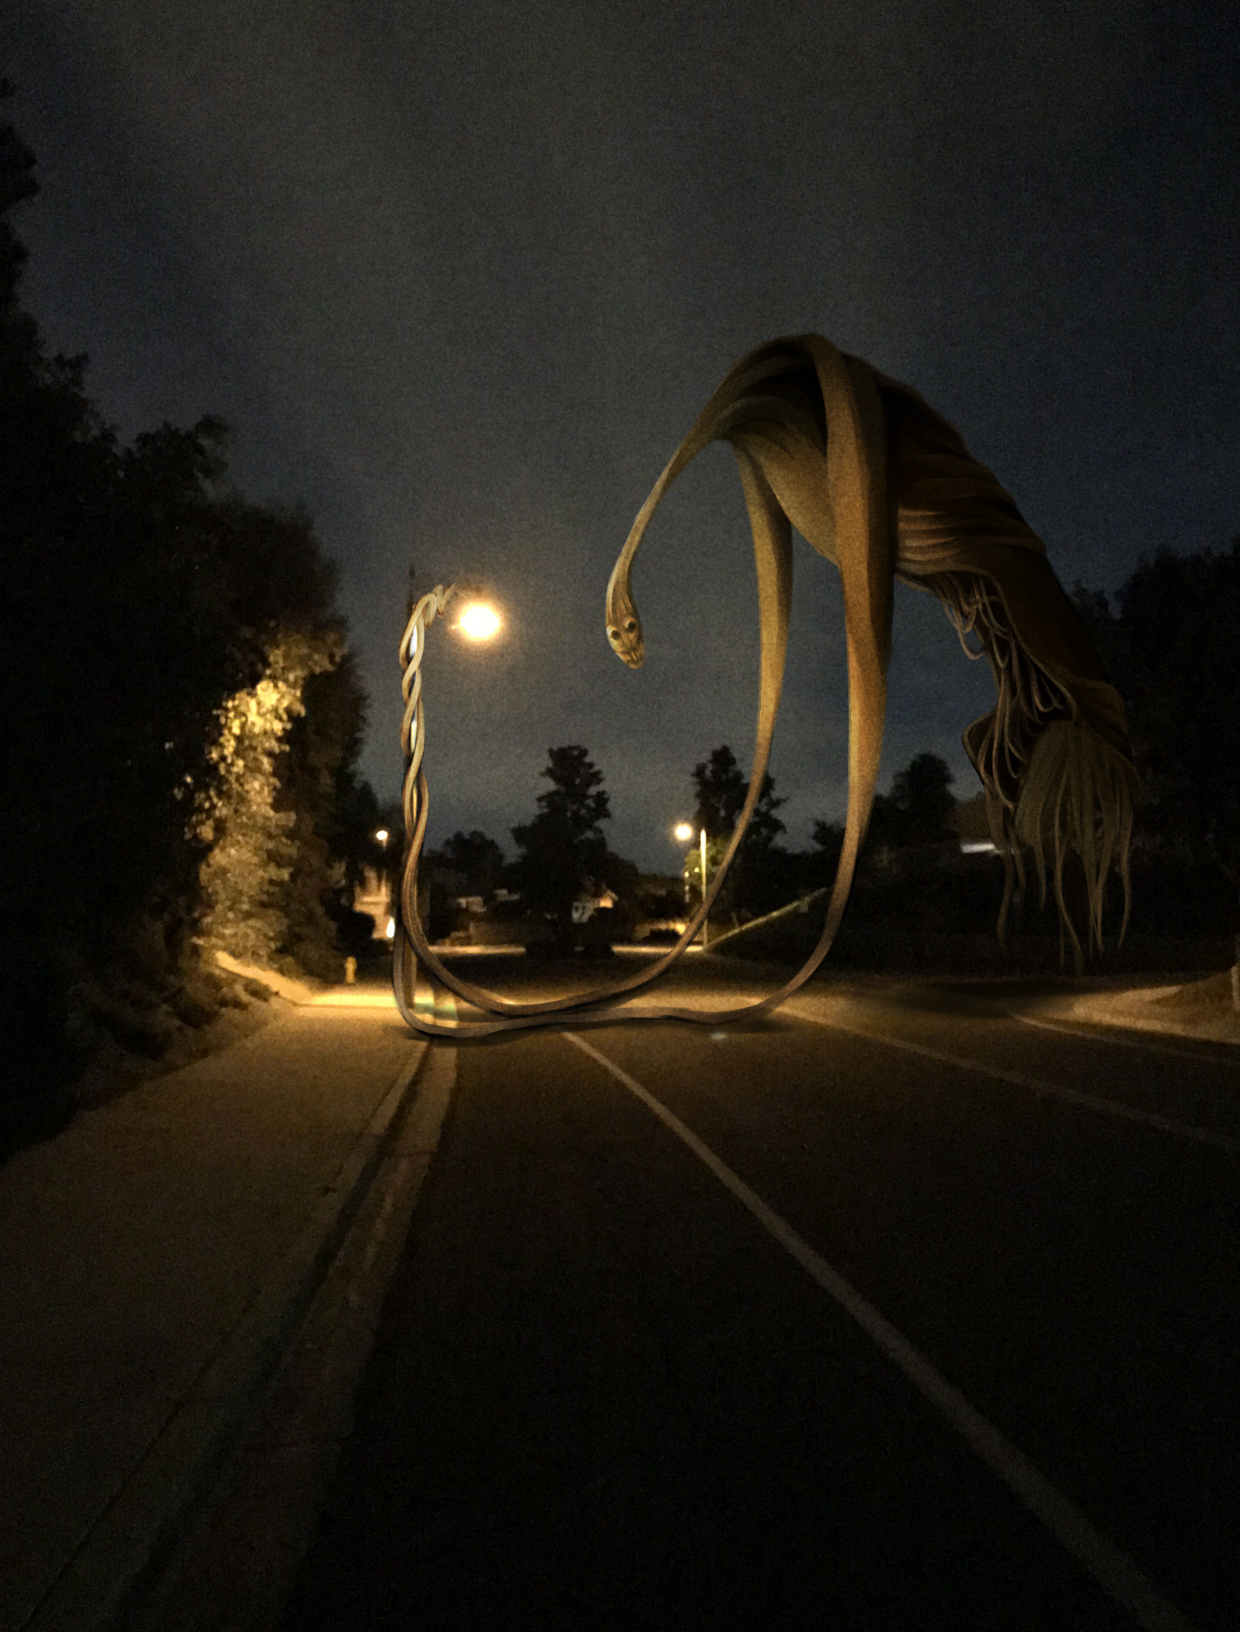 A creature arriving at a light post, conveniently at the same time you did!